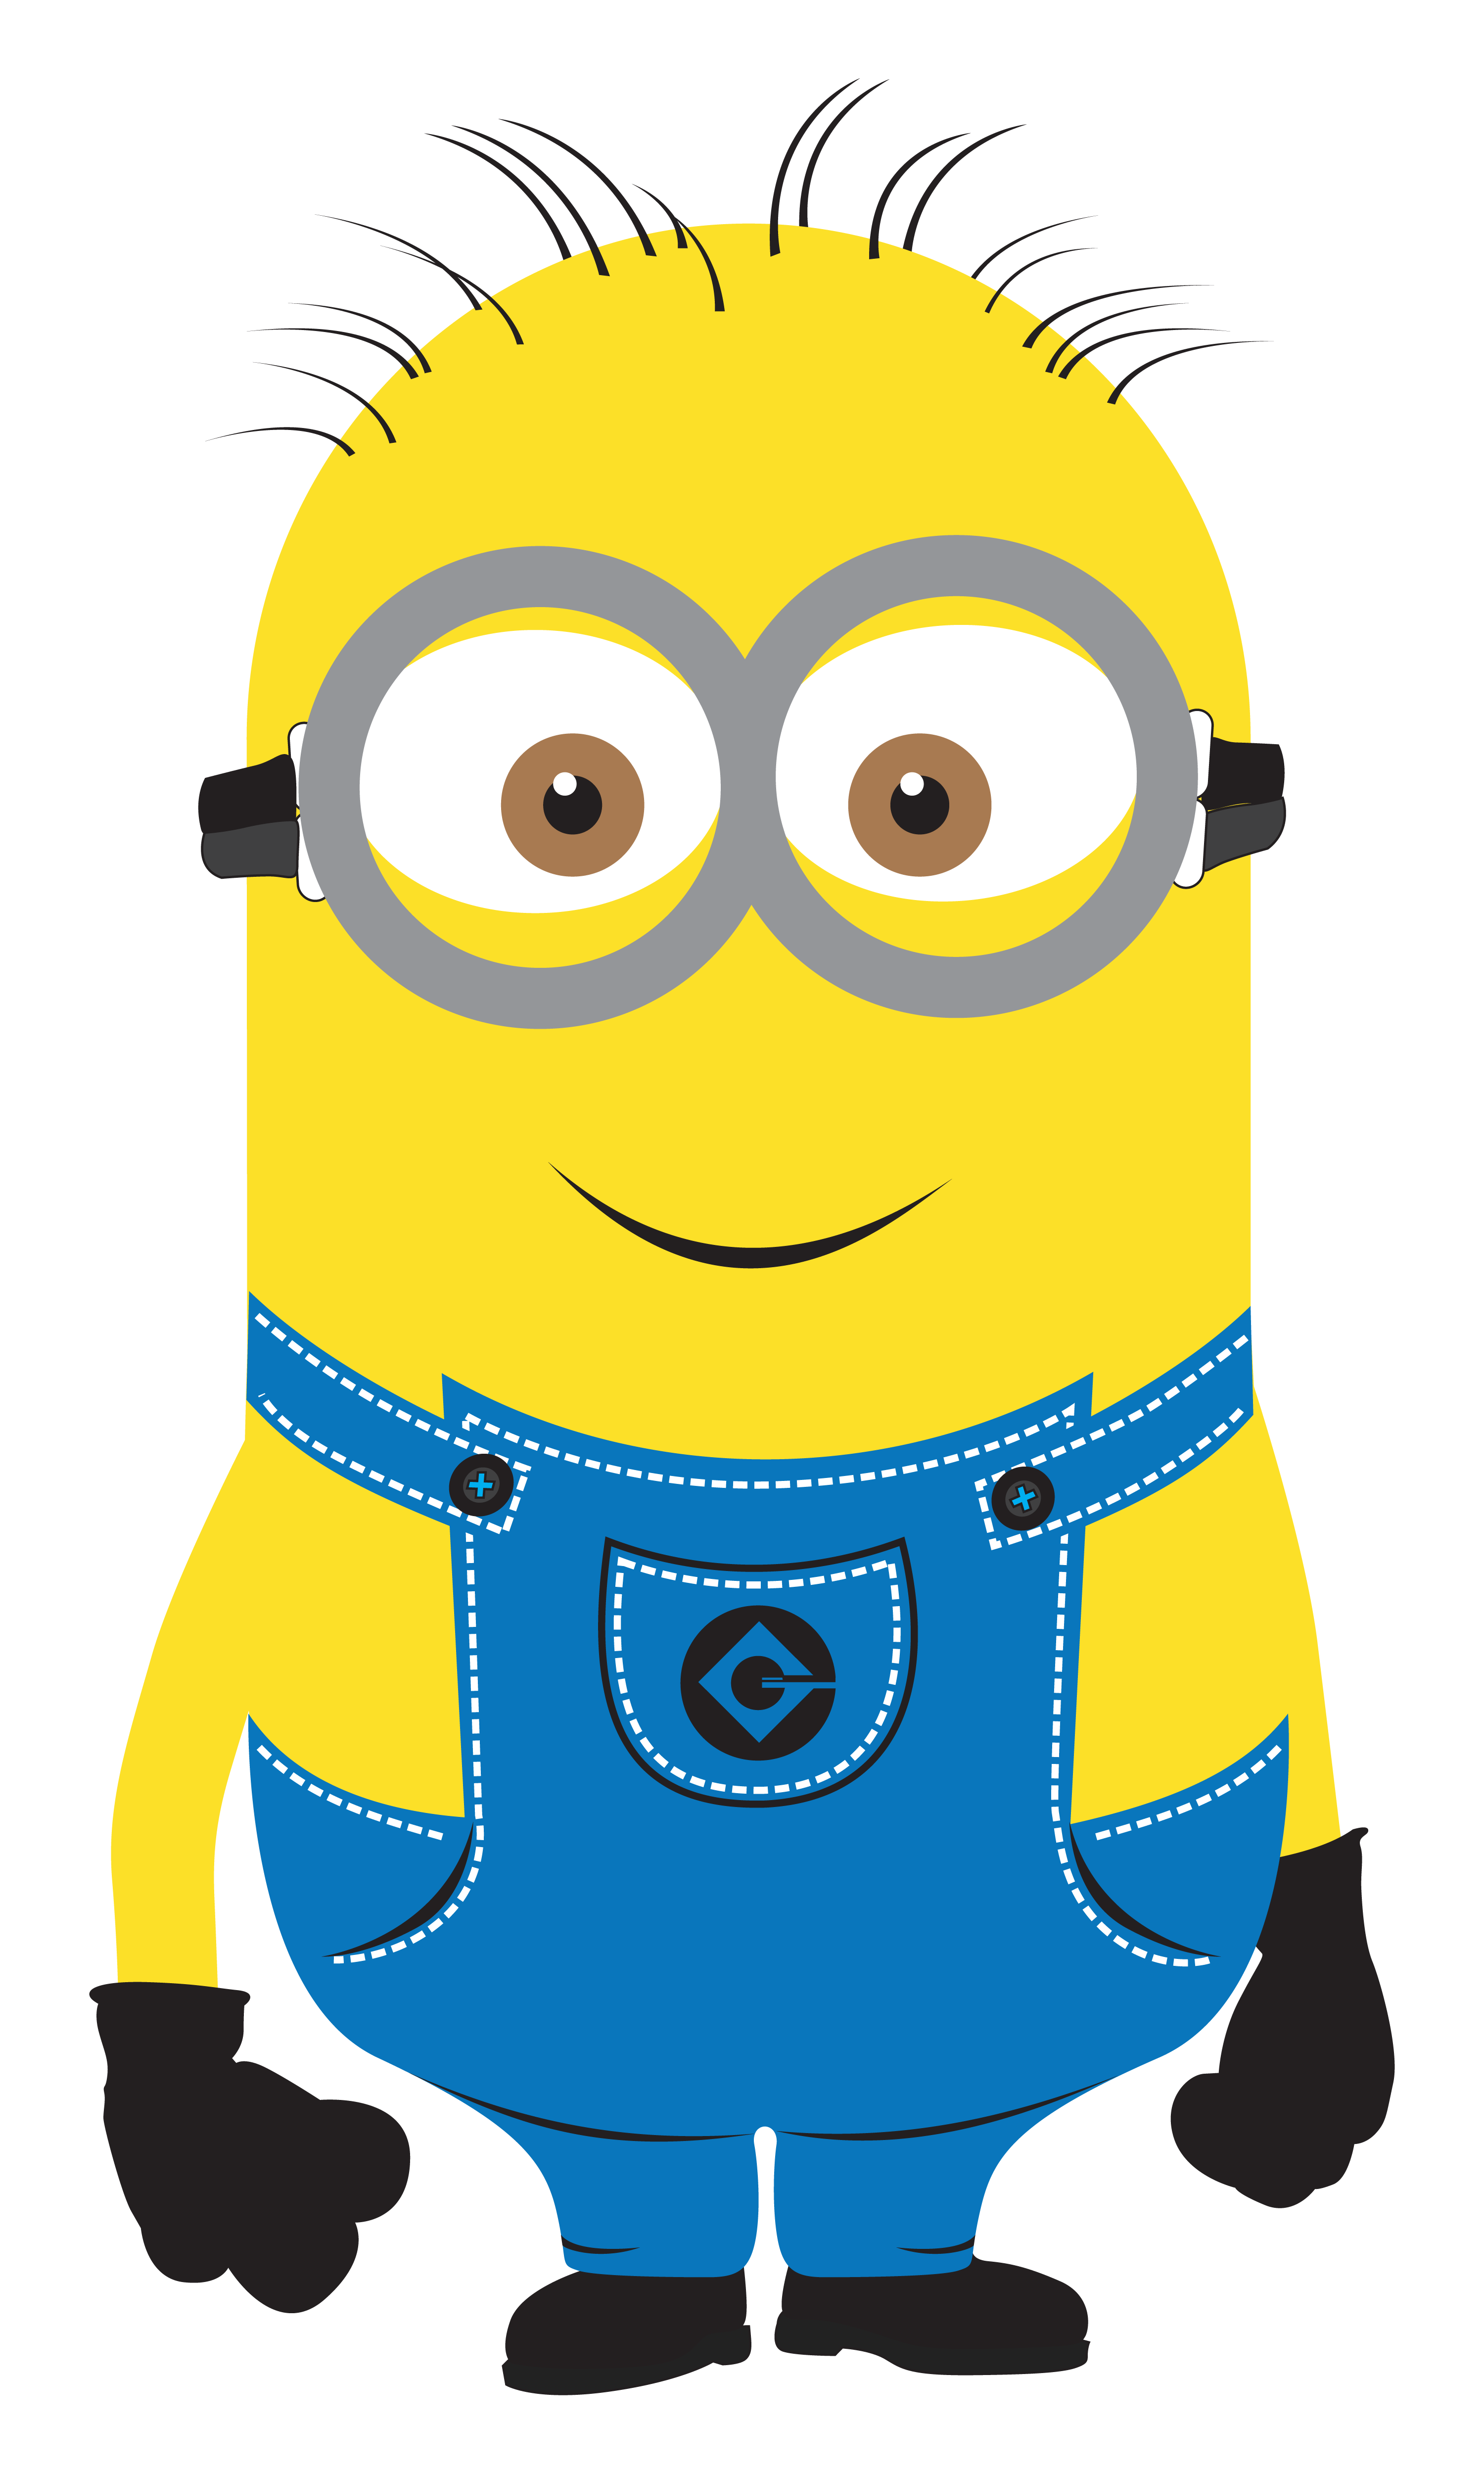 Despicable Me 2 Minions Vector Ai, Eps, Cdr  High Res PNGs